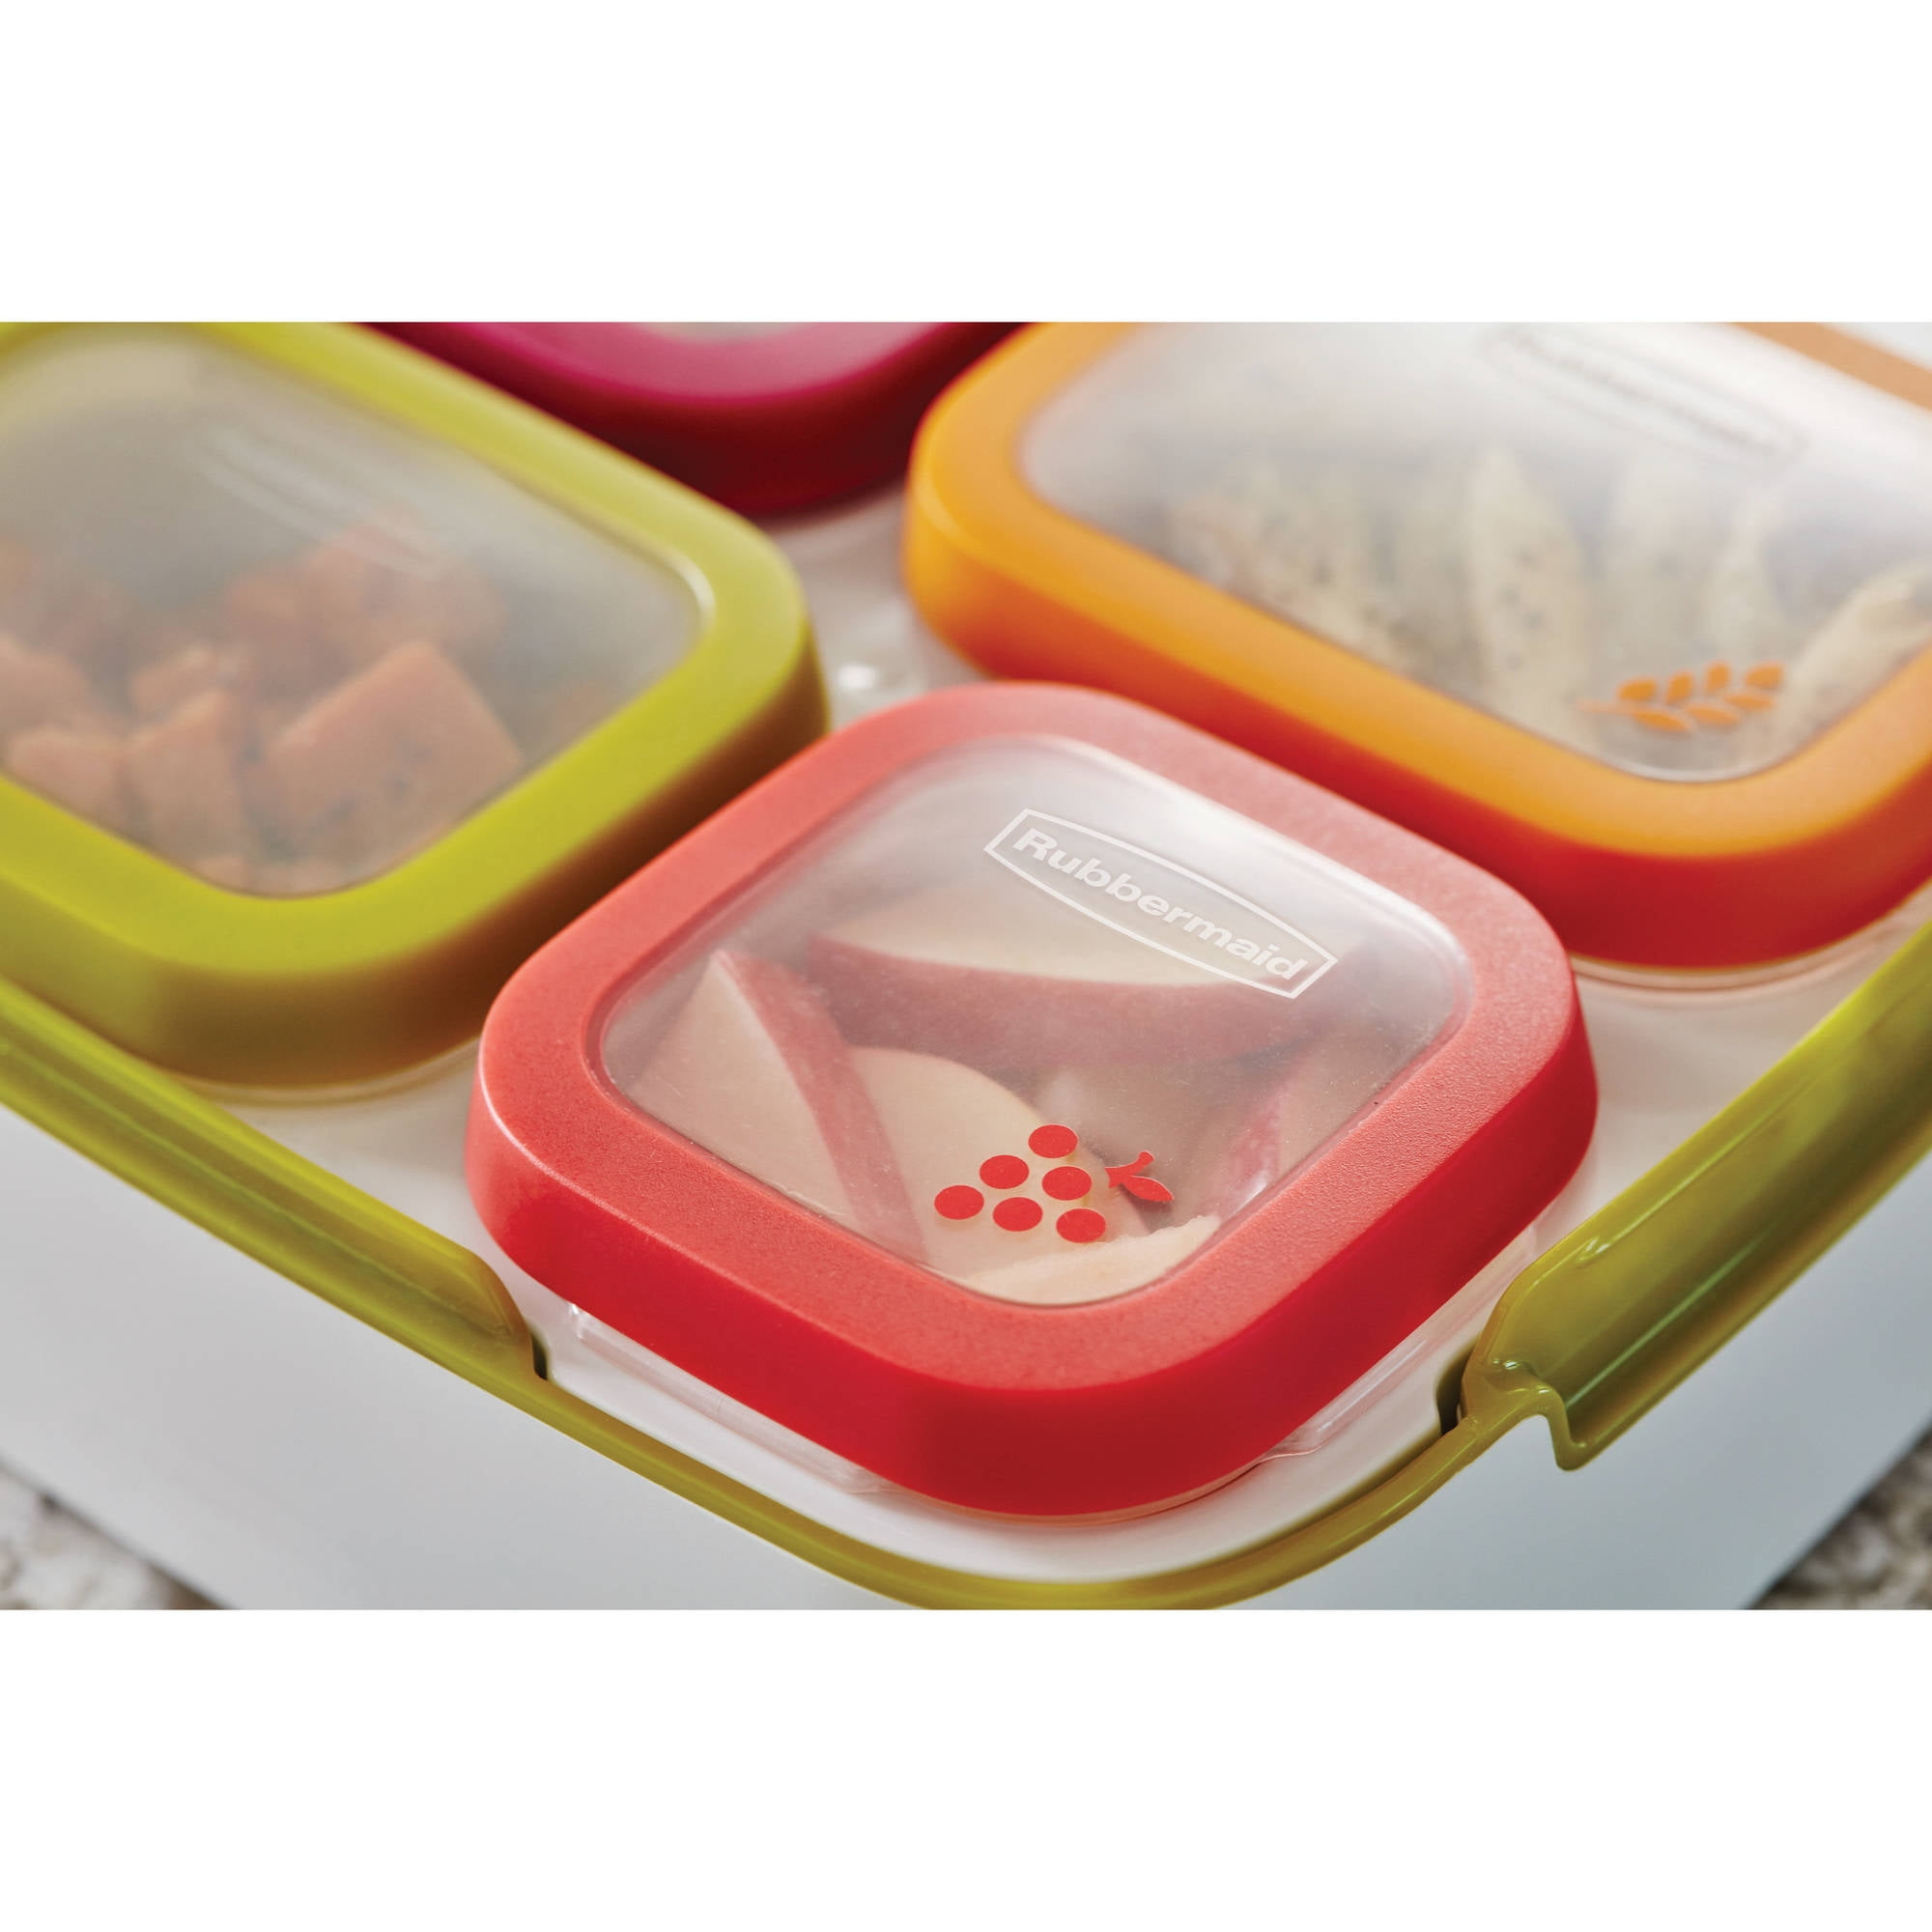  Rubbermaid Balance Pre Portioned Meal Kit Food Storage  Containers, White/Citron, 11 Piece Set including Lids, Bento Box Style